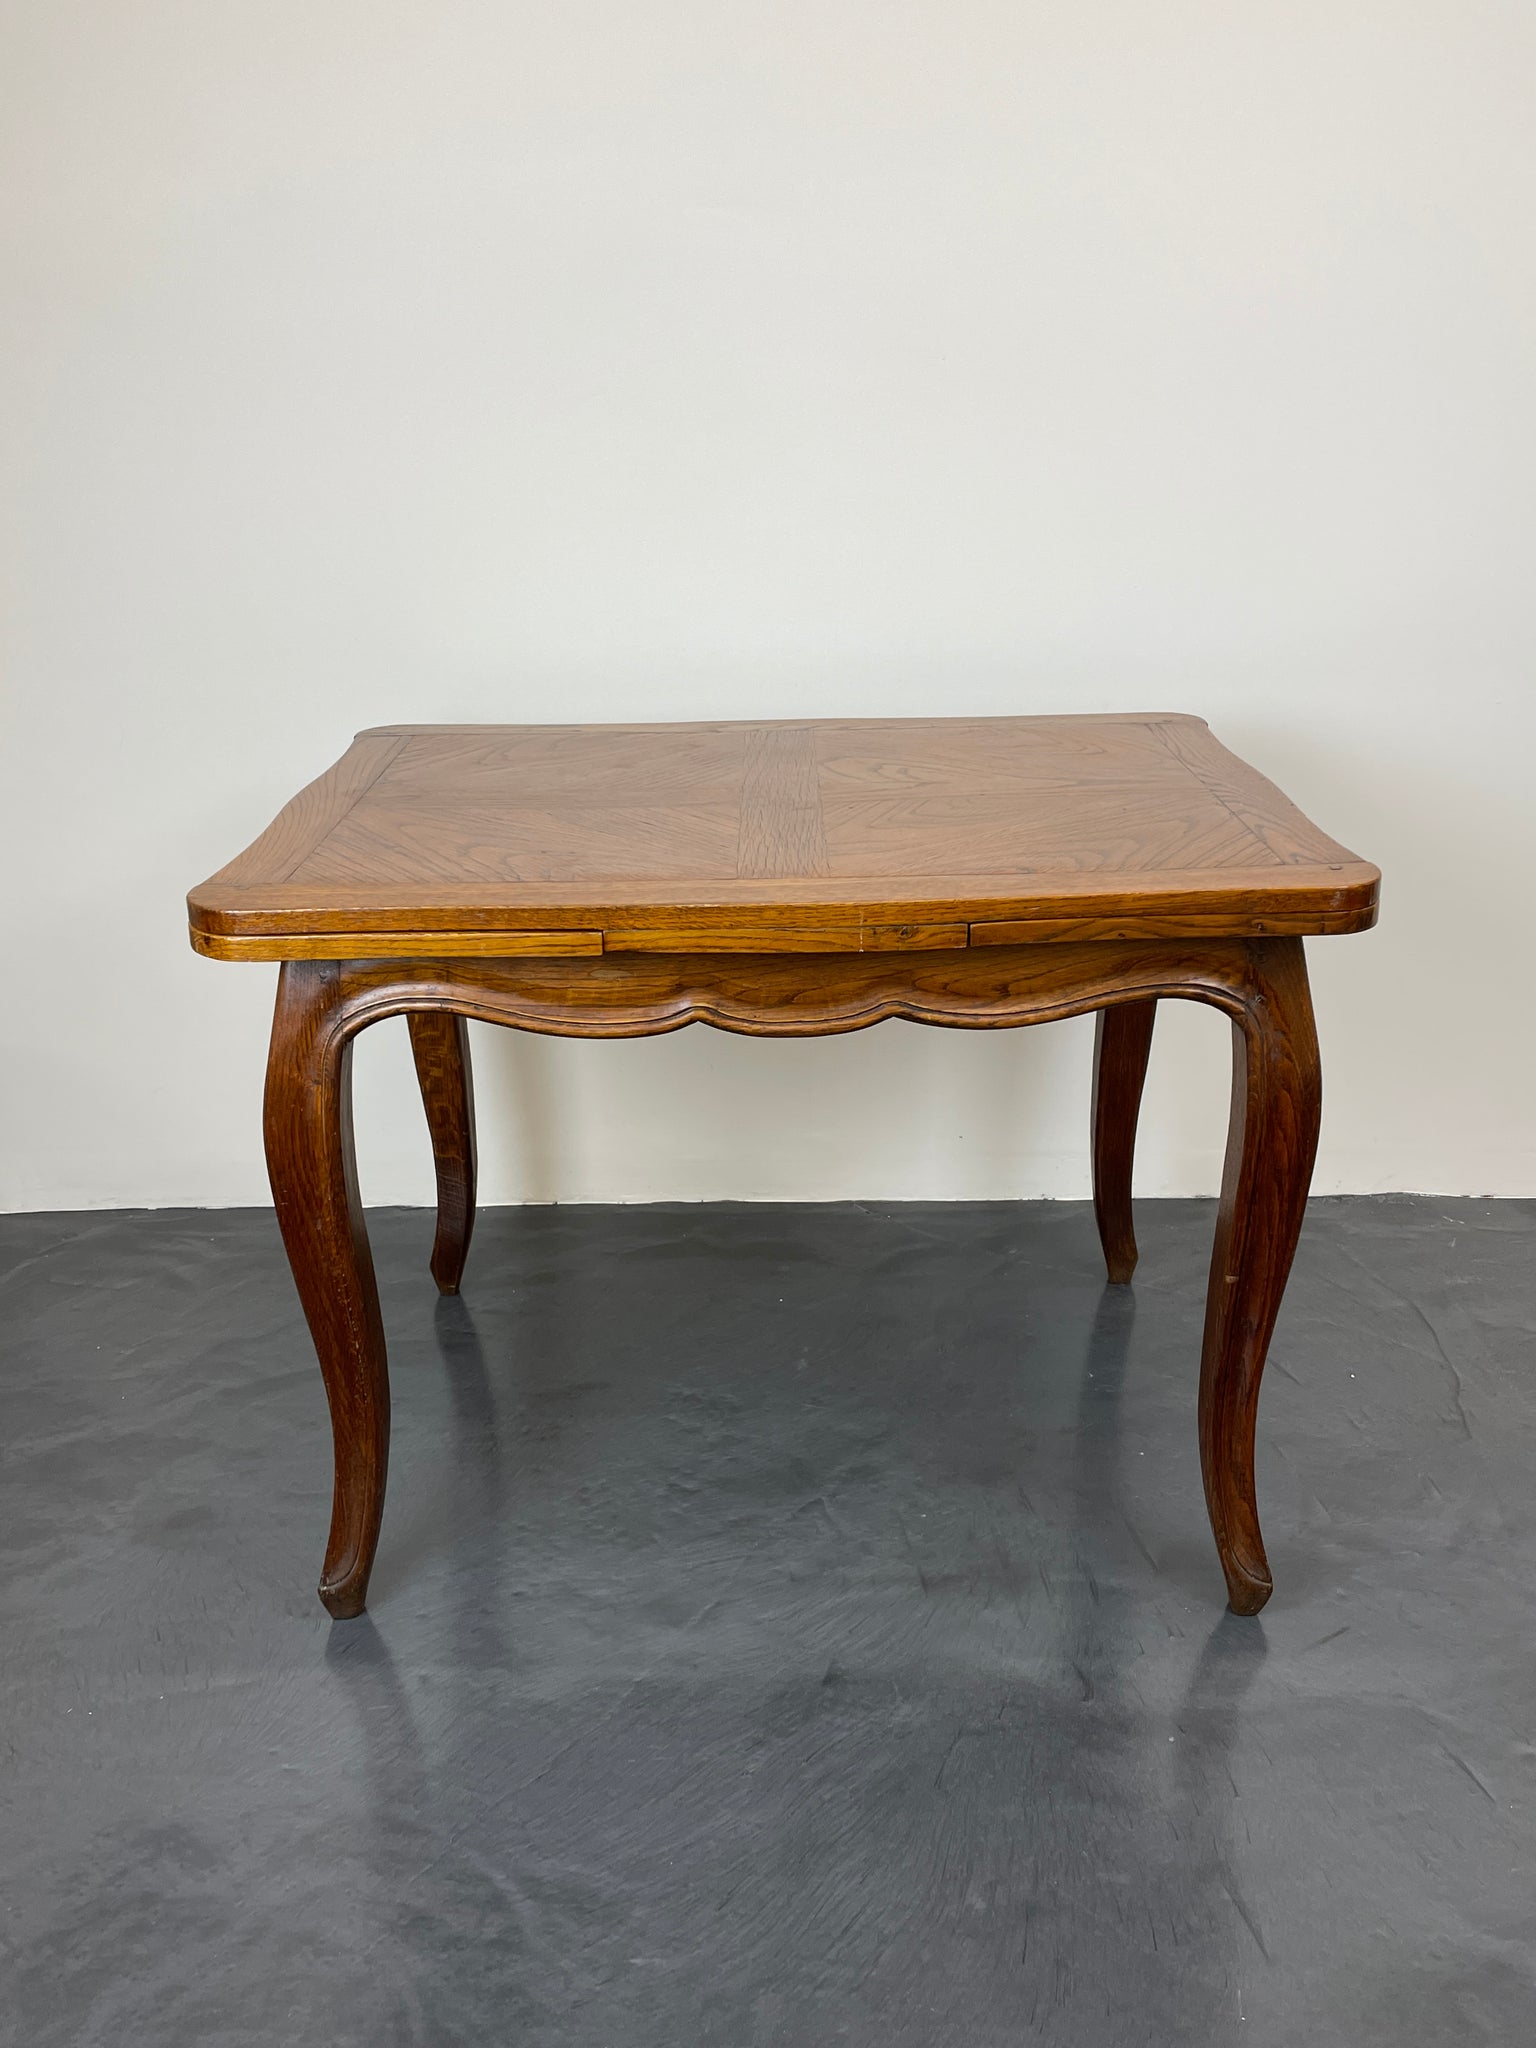 [Igor Stravinsky]  Wooden Tea Table from the Stravinsky Collection, ca. 1940